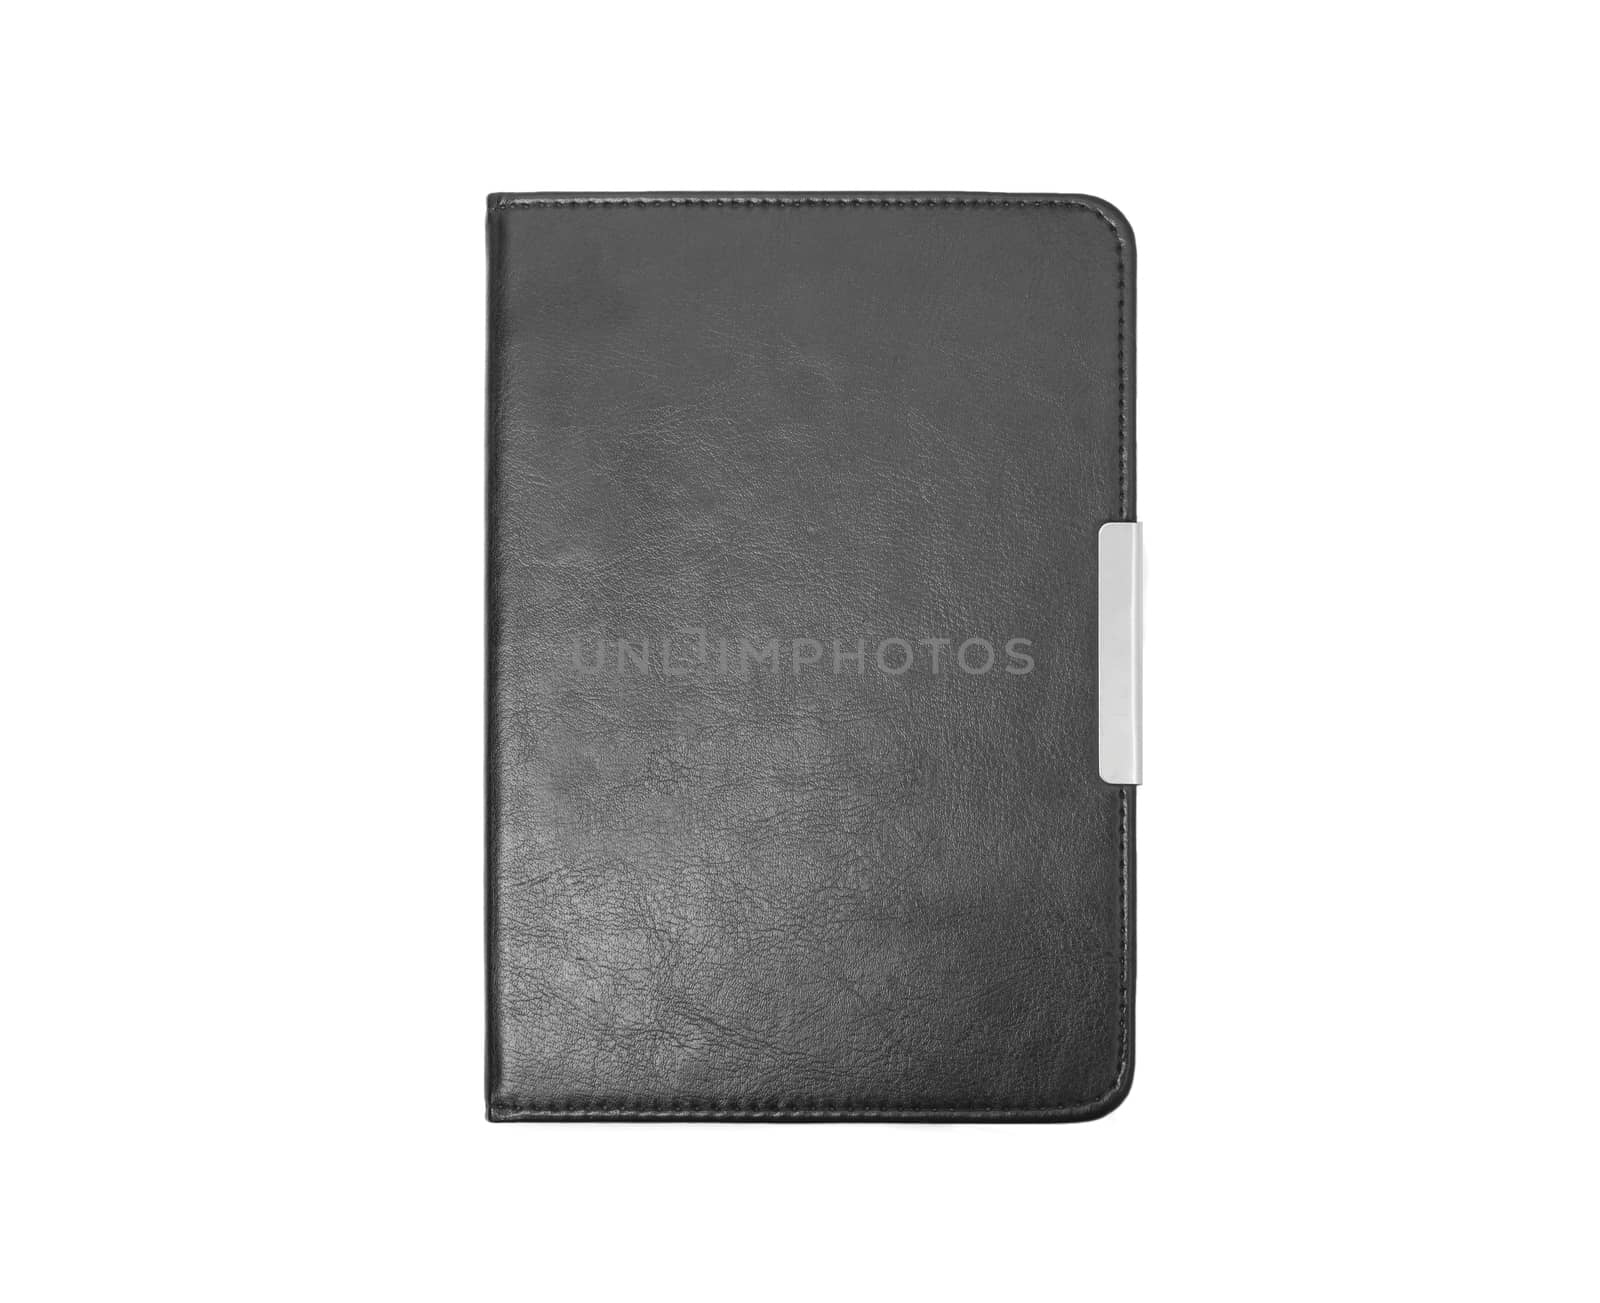 Black leather folder isolated on white background. With clipping path